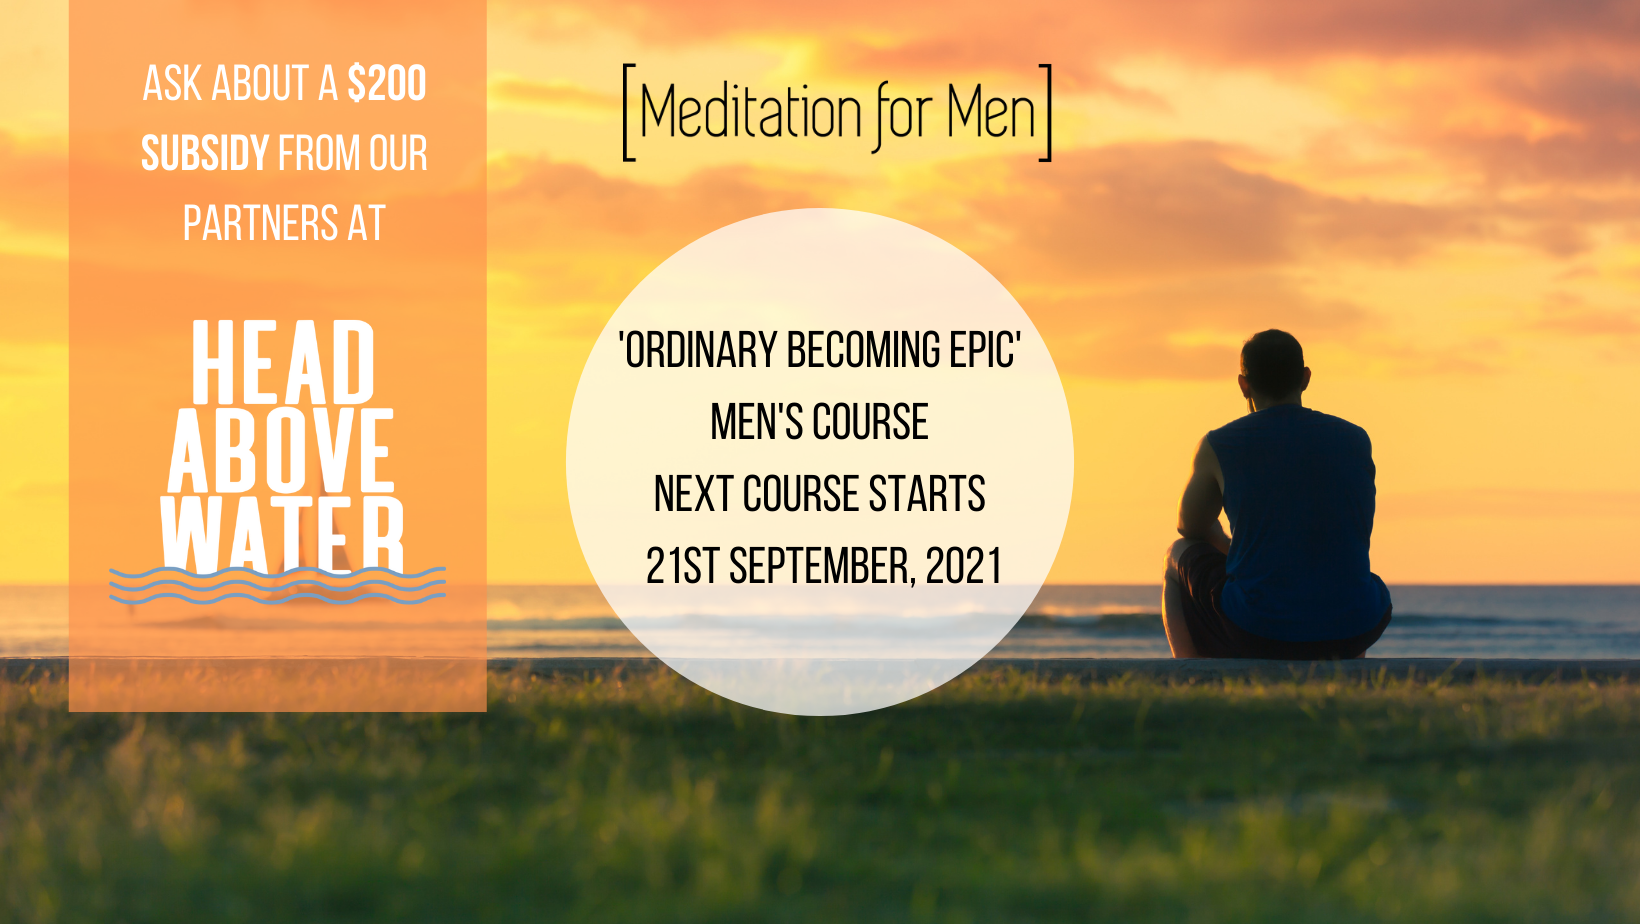 Men's 'Ordinary becoming EPIC' Course - Meditation, Breathwork, Life Skills and Tools